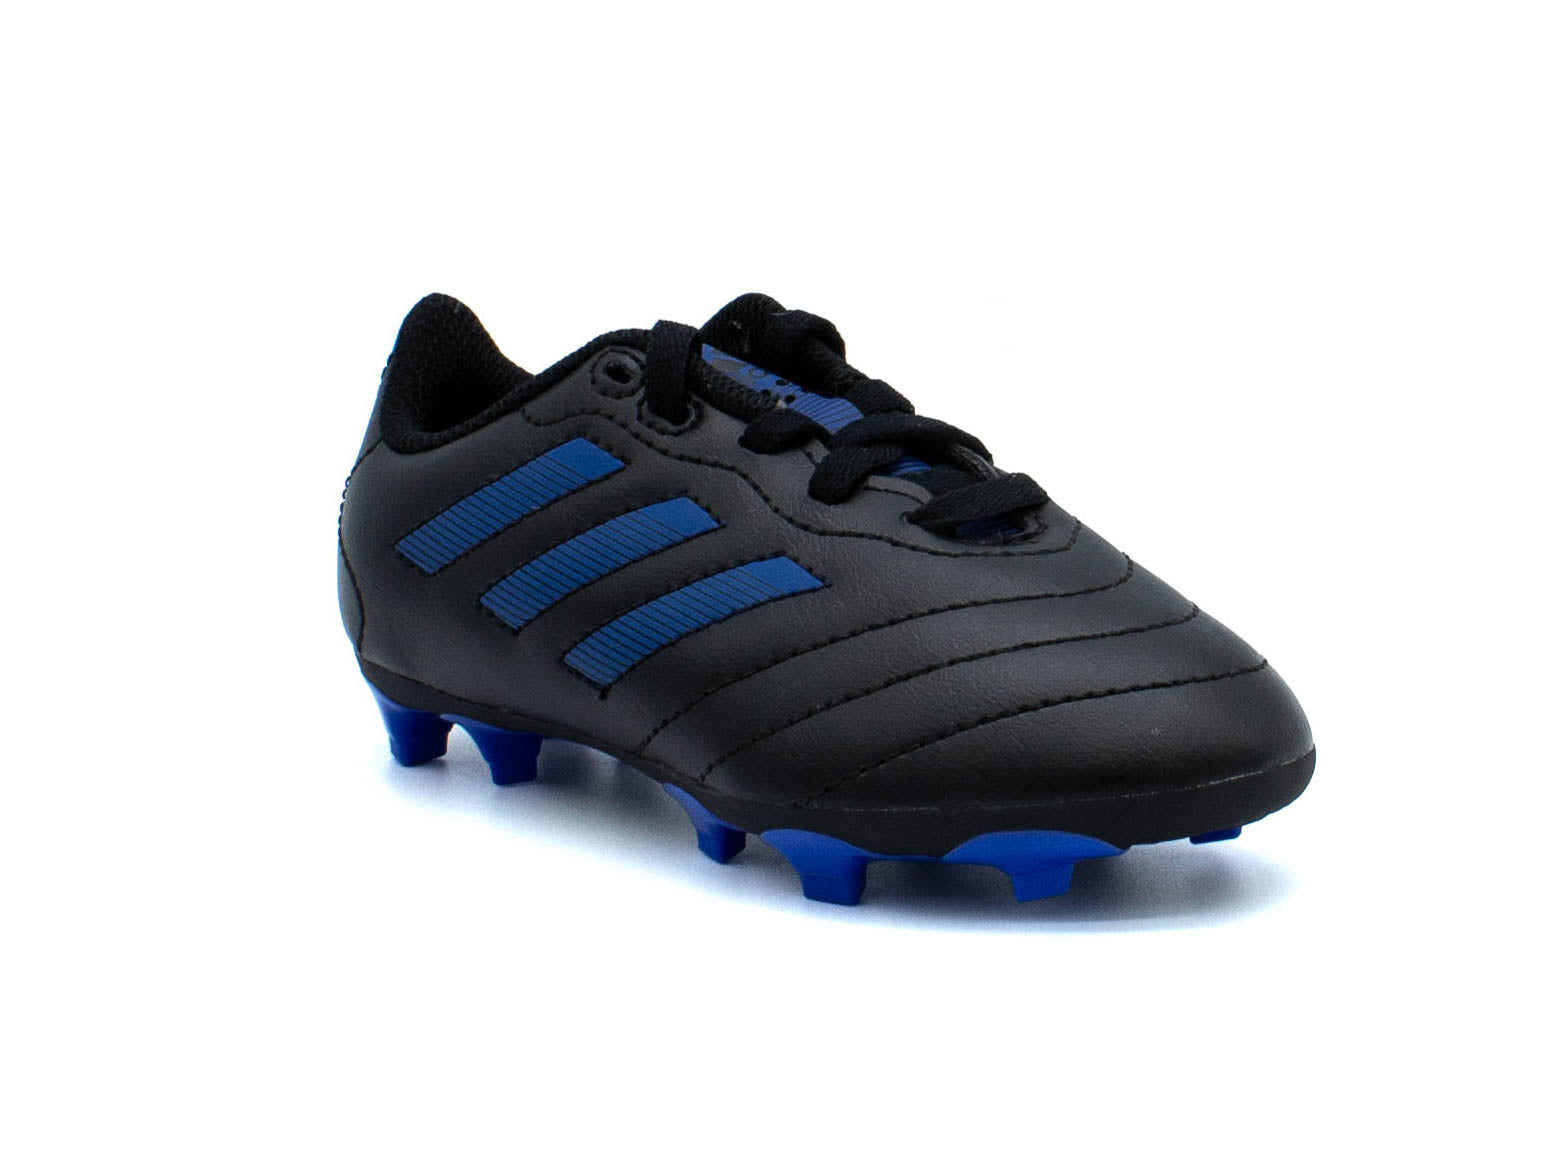 ADIDAS GOLETTO VIII FIRM GROUND CLEATS